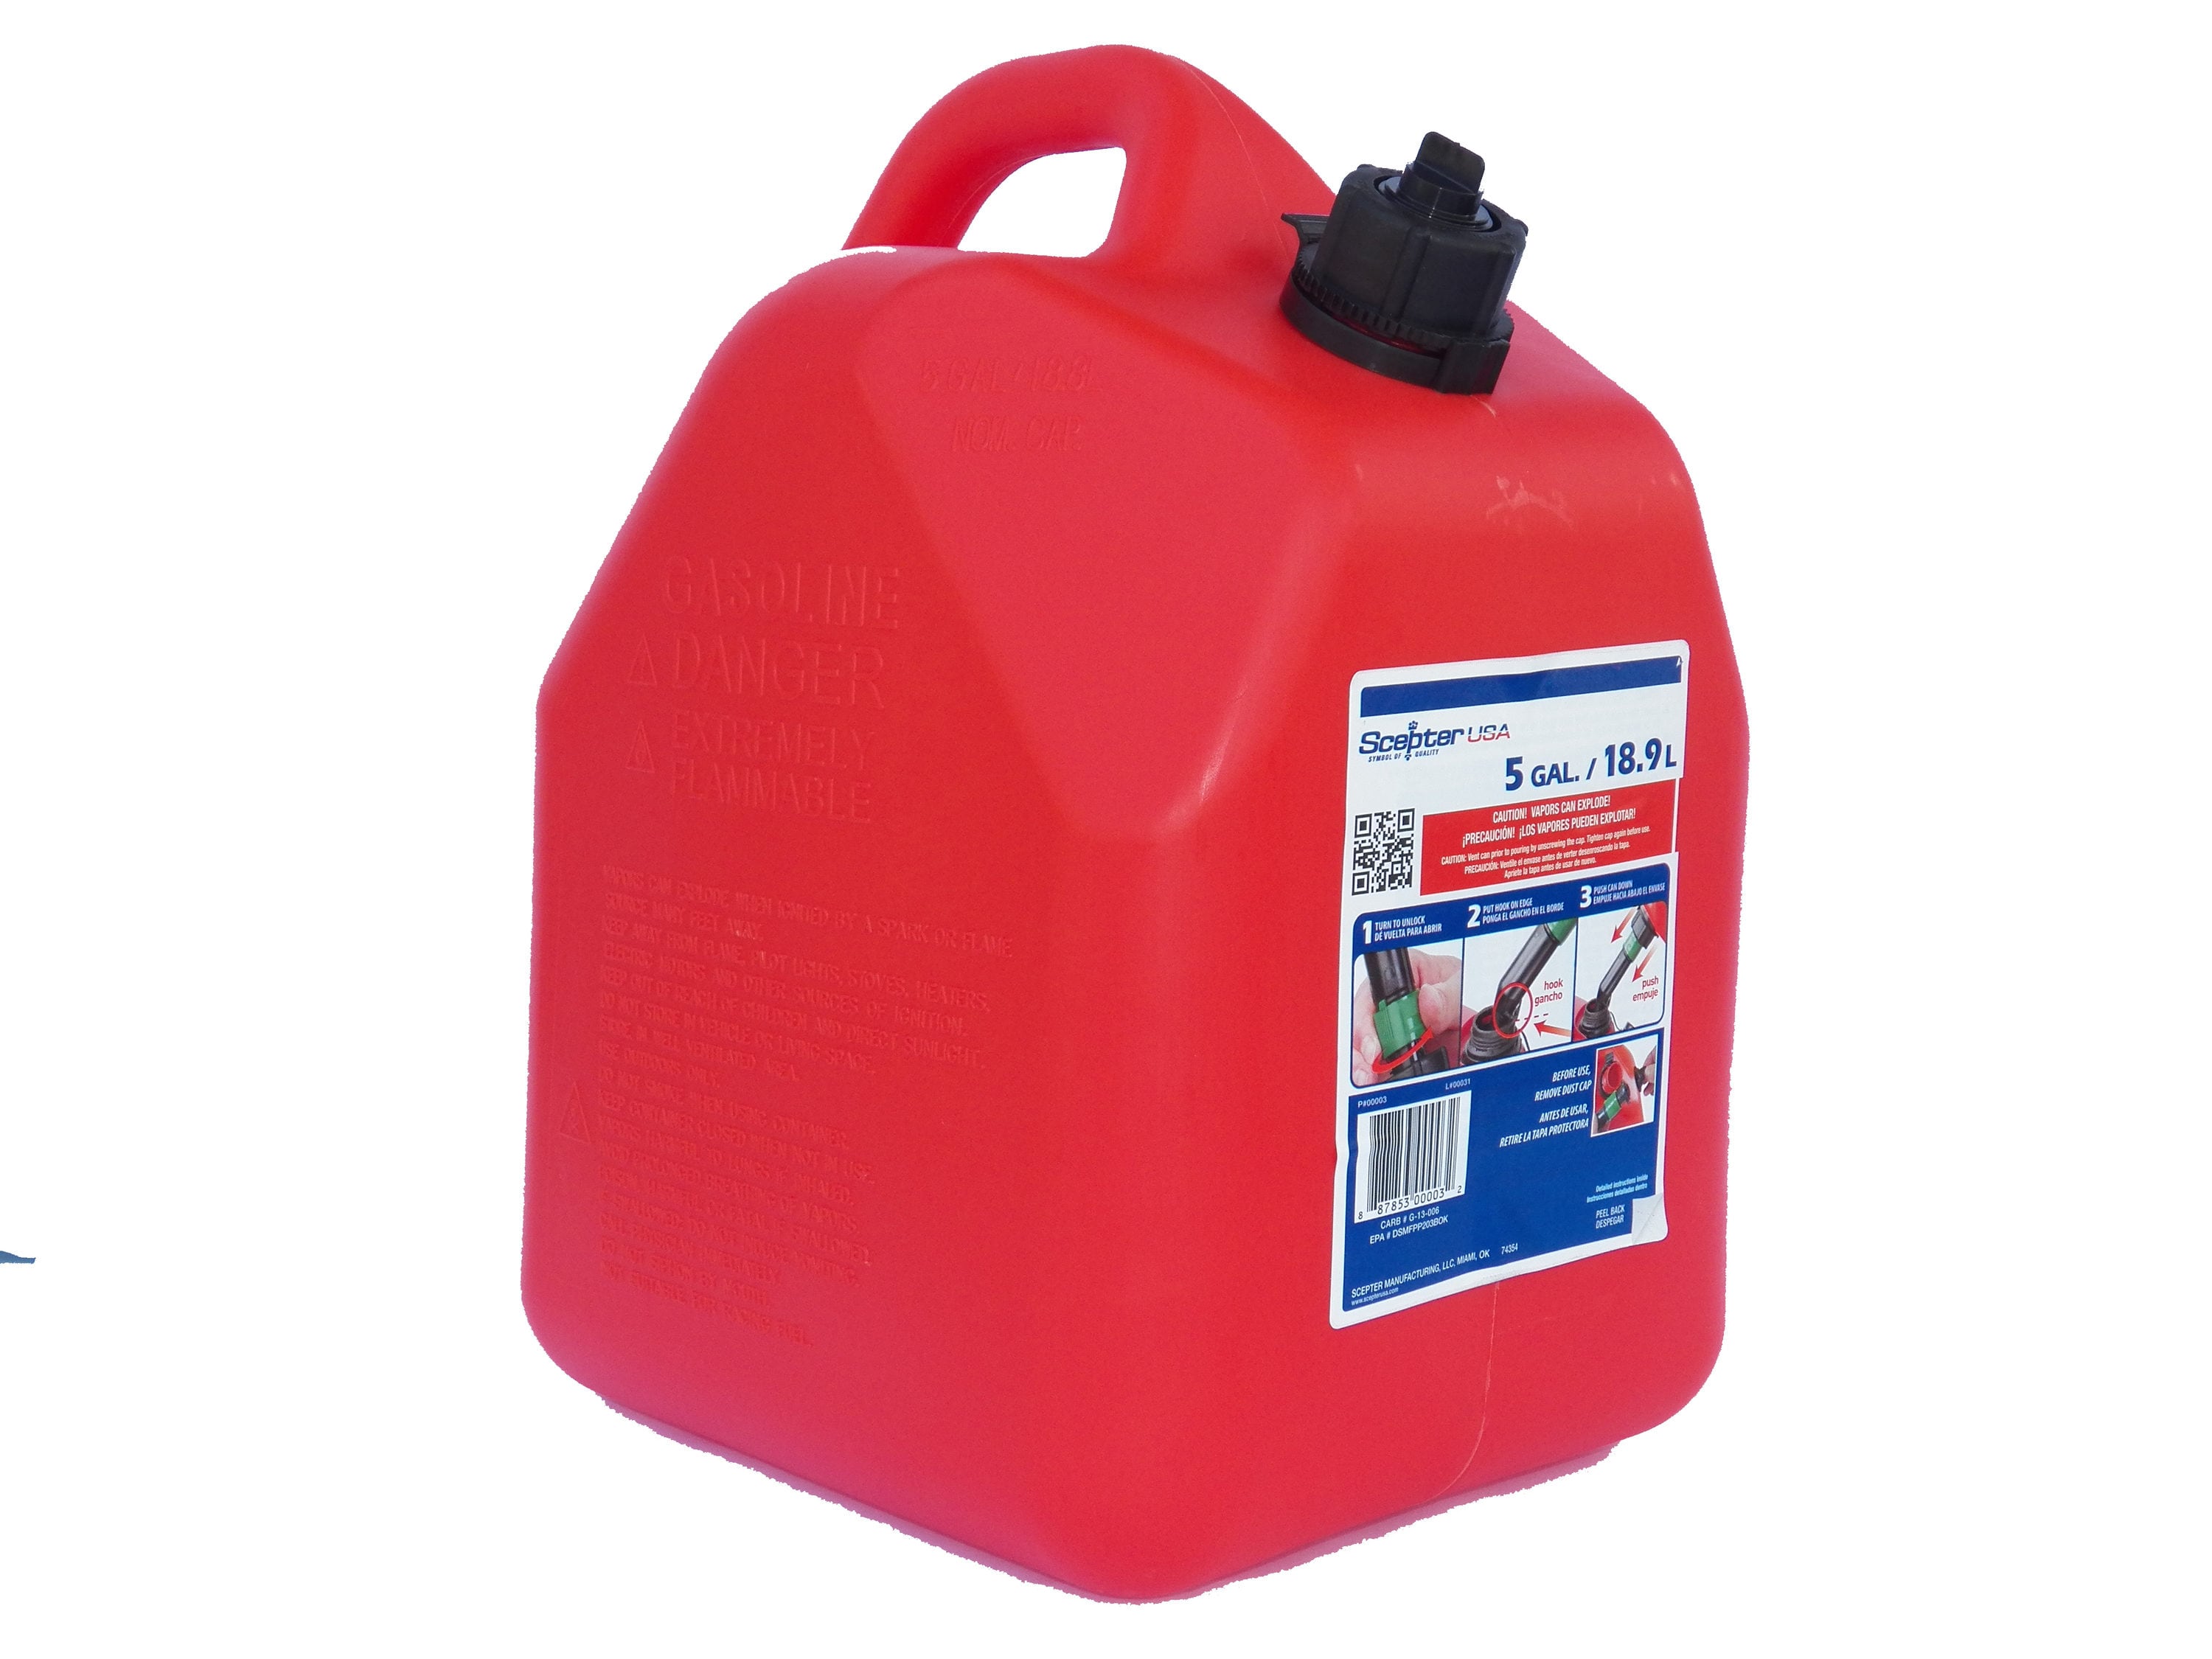 CARB Compliant Gas Can SCEPTER 00003 5 gal 